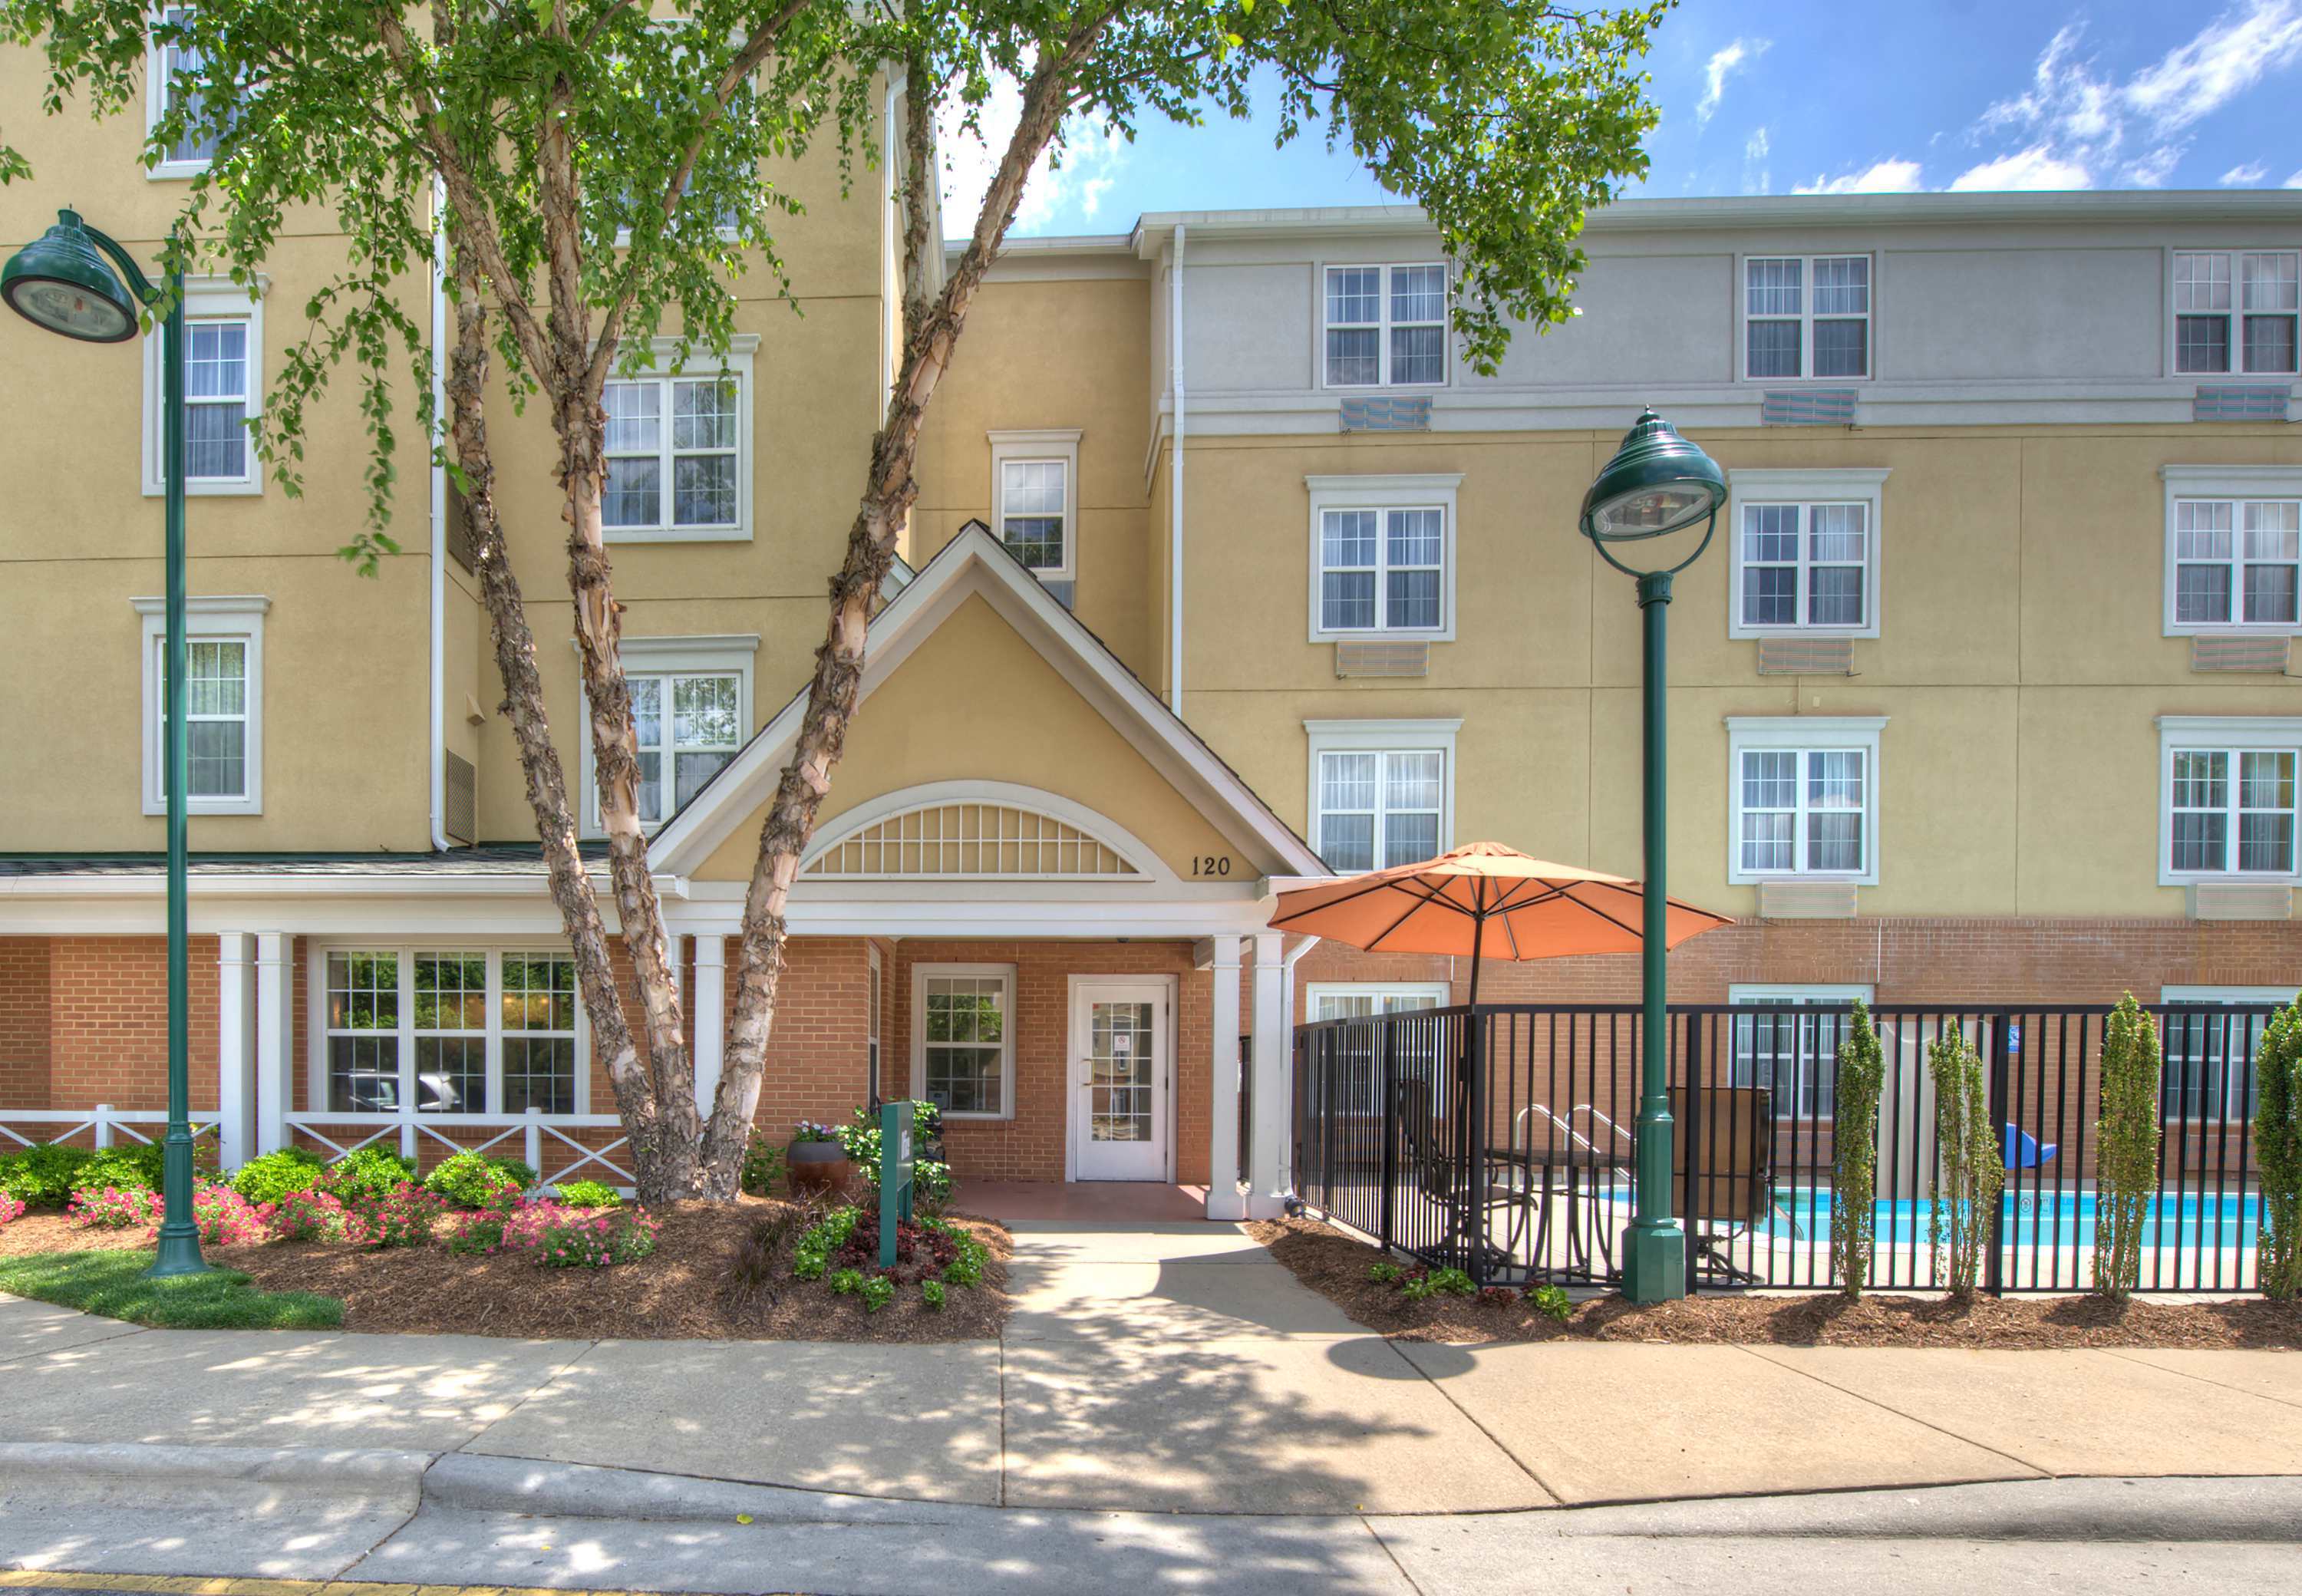 Photo of TownePlace Suites Raleigh Cary, Cary, NC